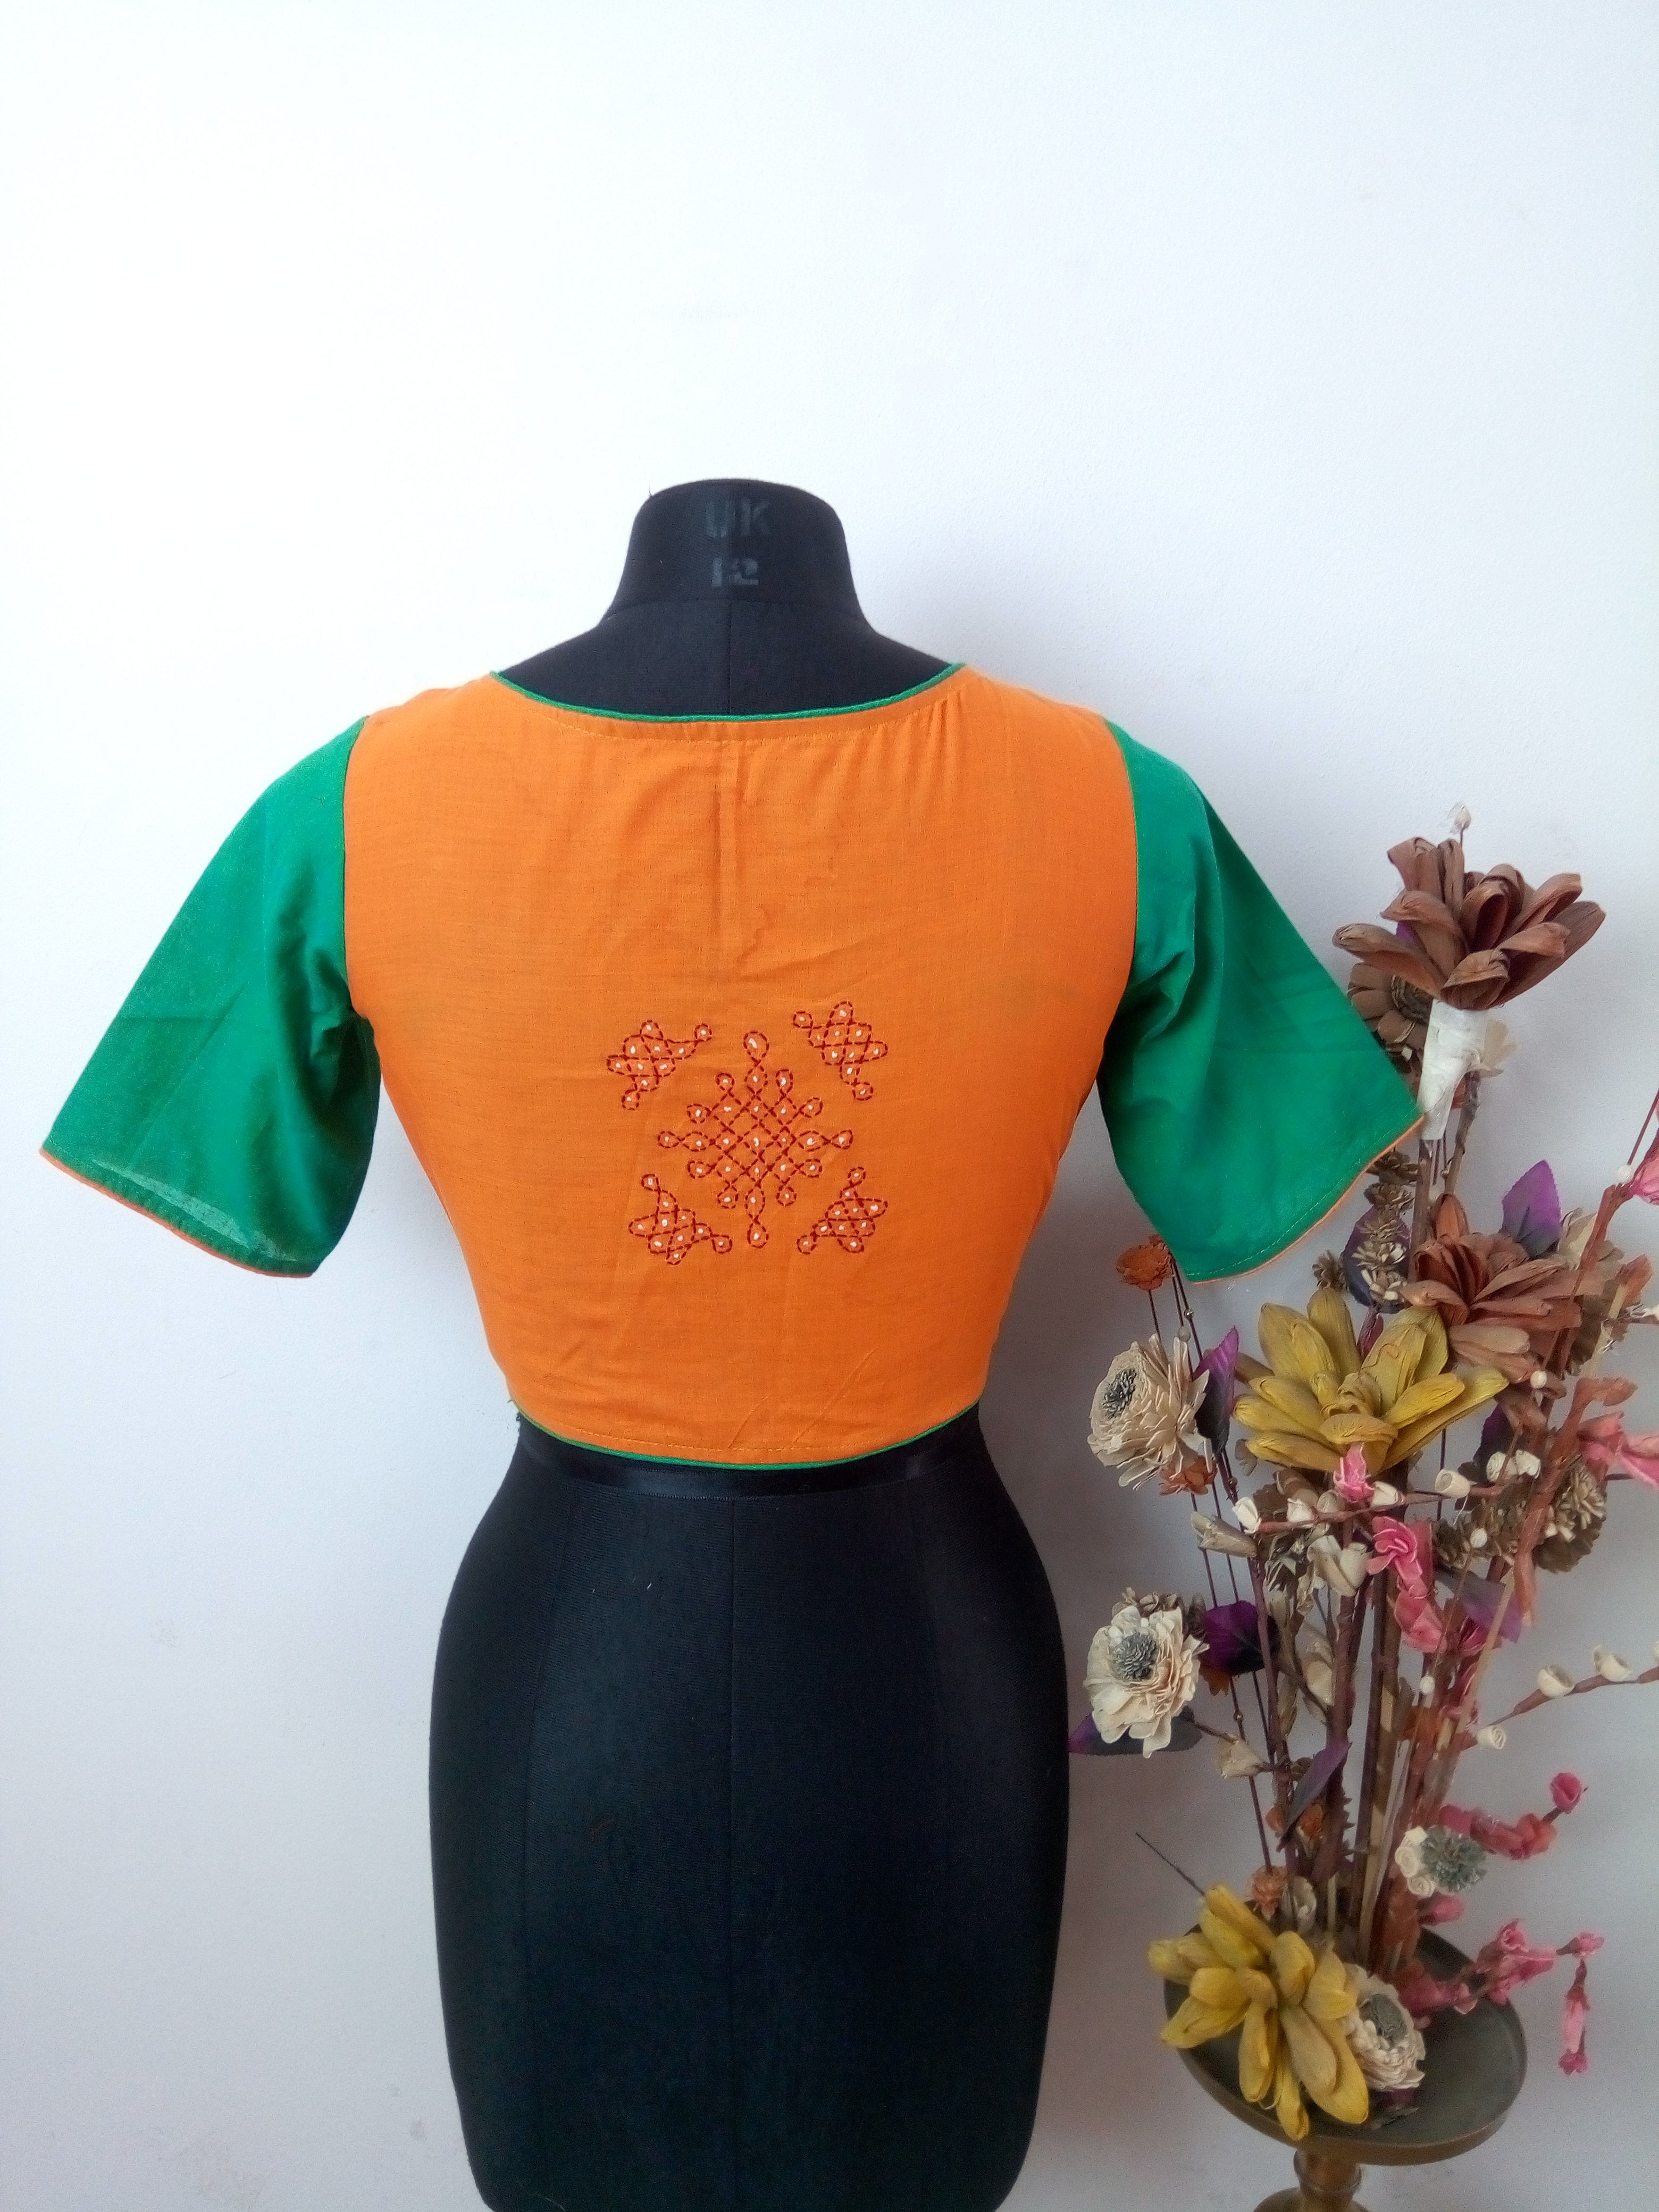 Rangoli embroidery design on the back of the blouse